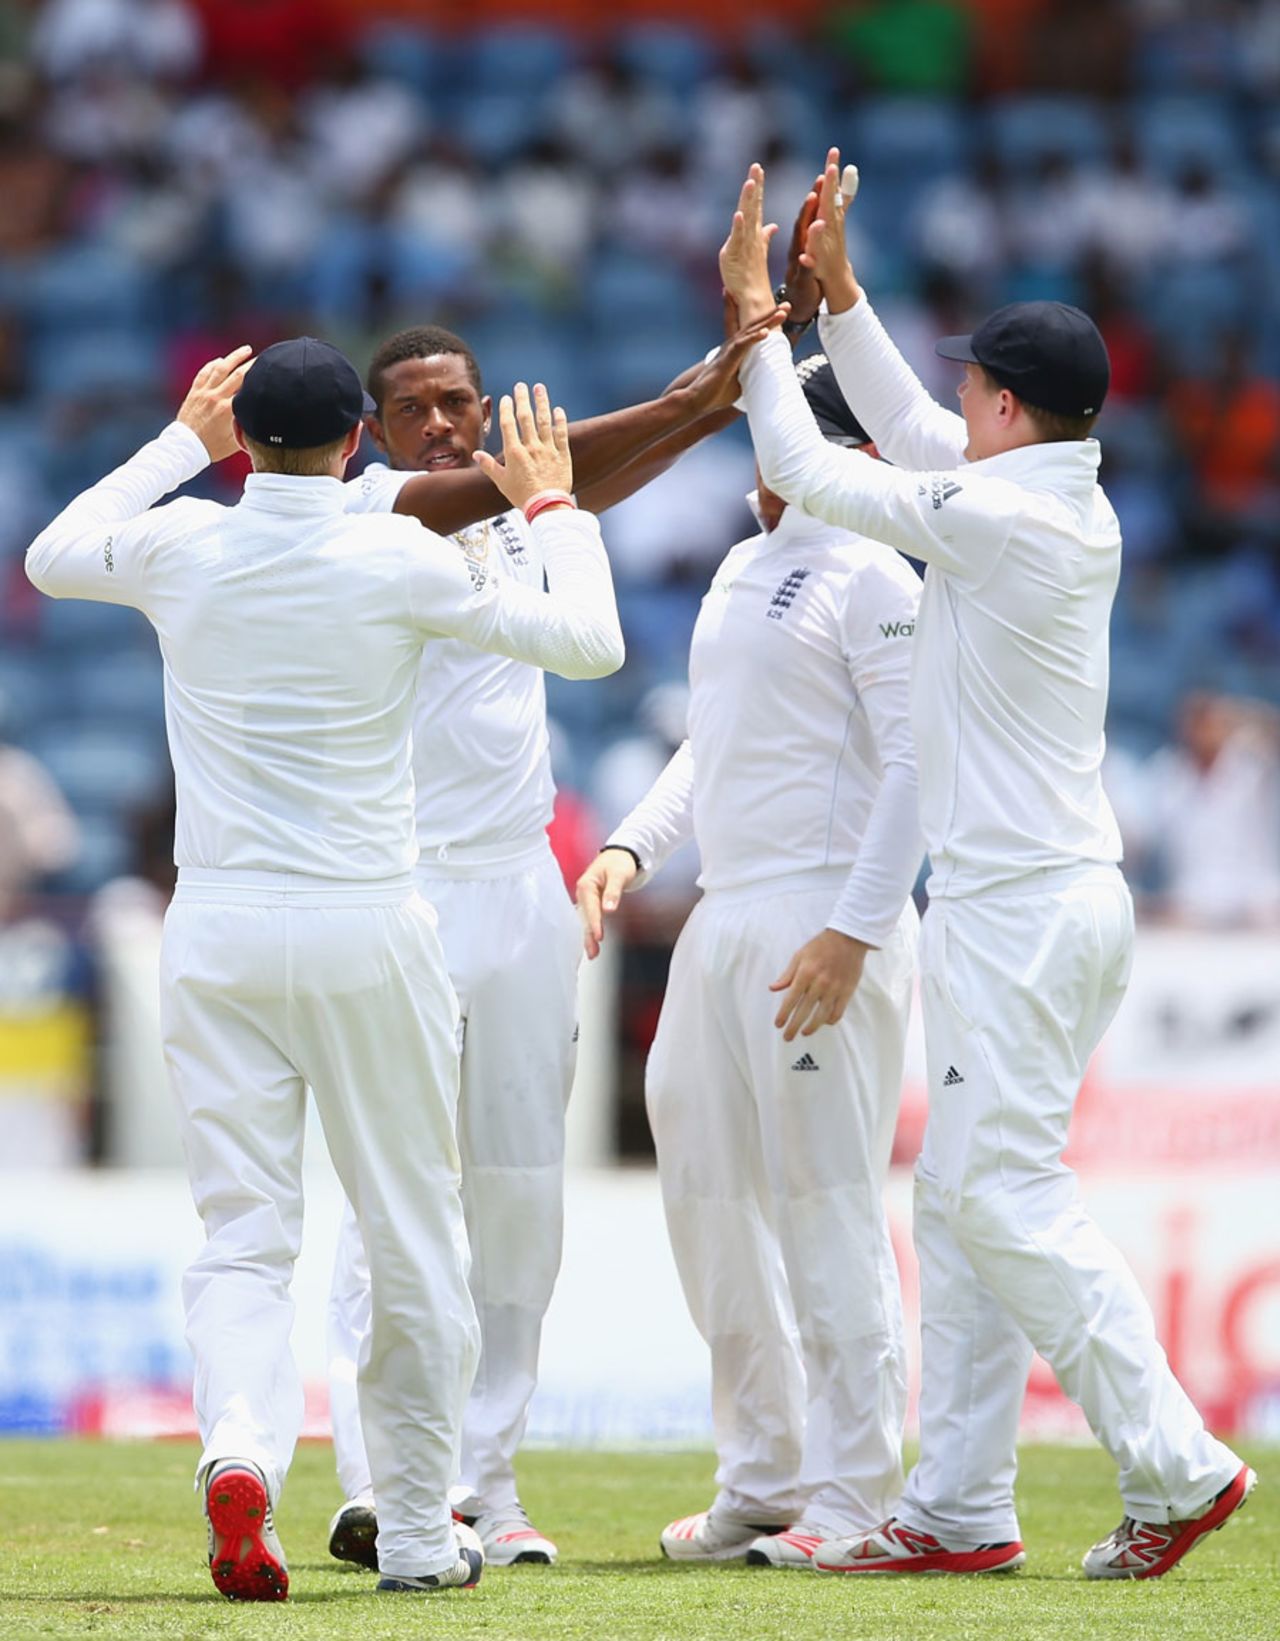 Chris Jordan struck in his second over, West Indies v England, 2nd Test, St George's, 1st day, April 21, 2015